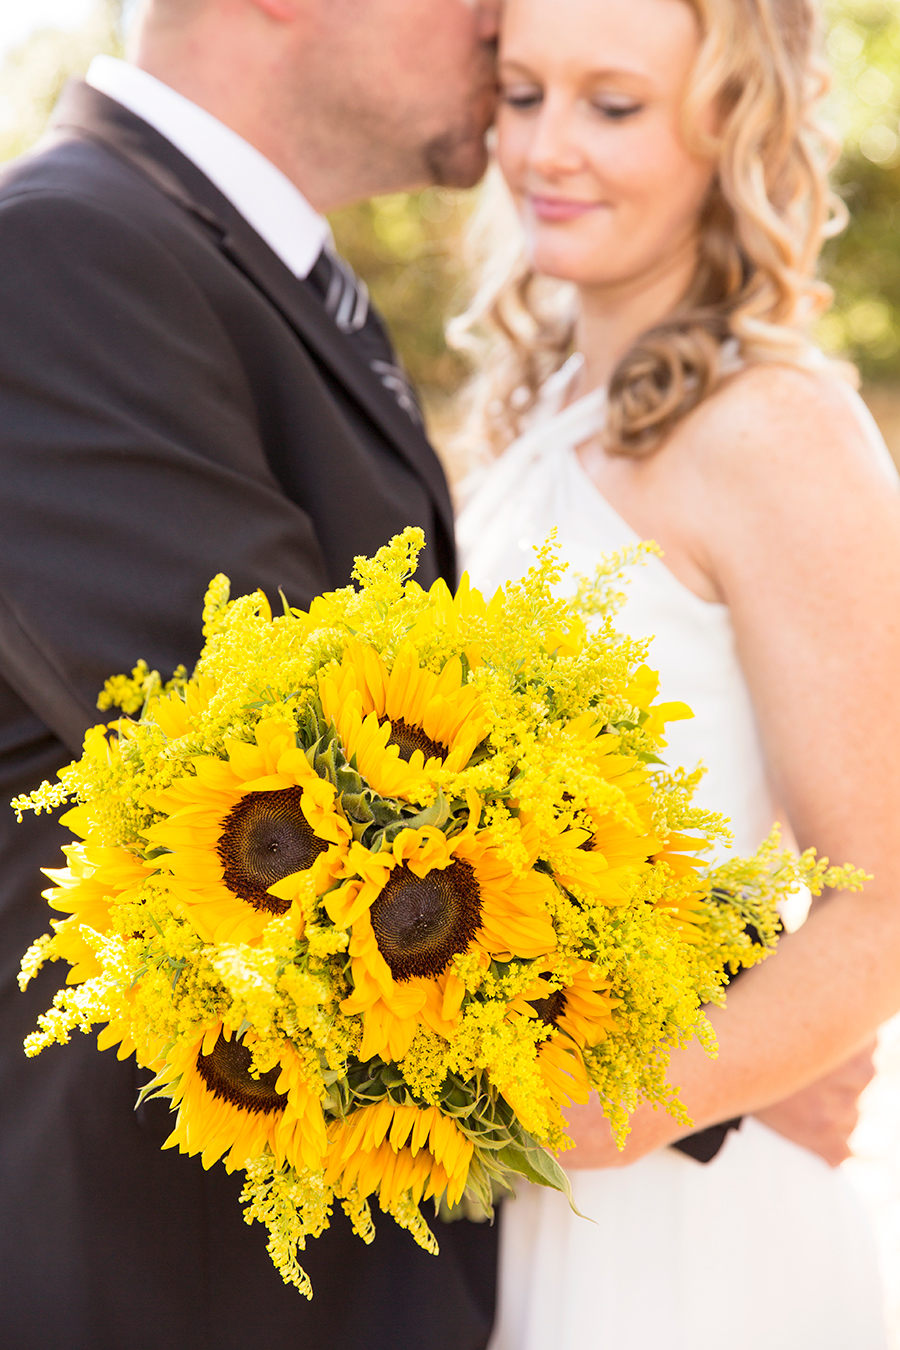 Fall Elopement at The Historic Hanover Court House - Image Property of www.j-dphoto.com